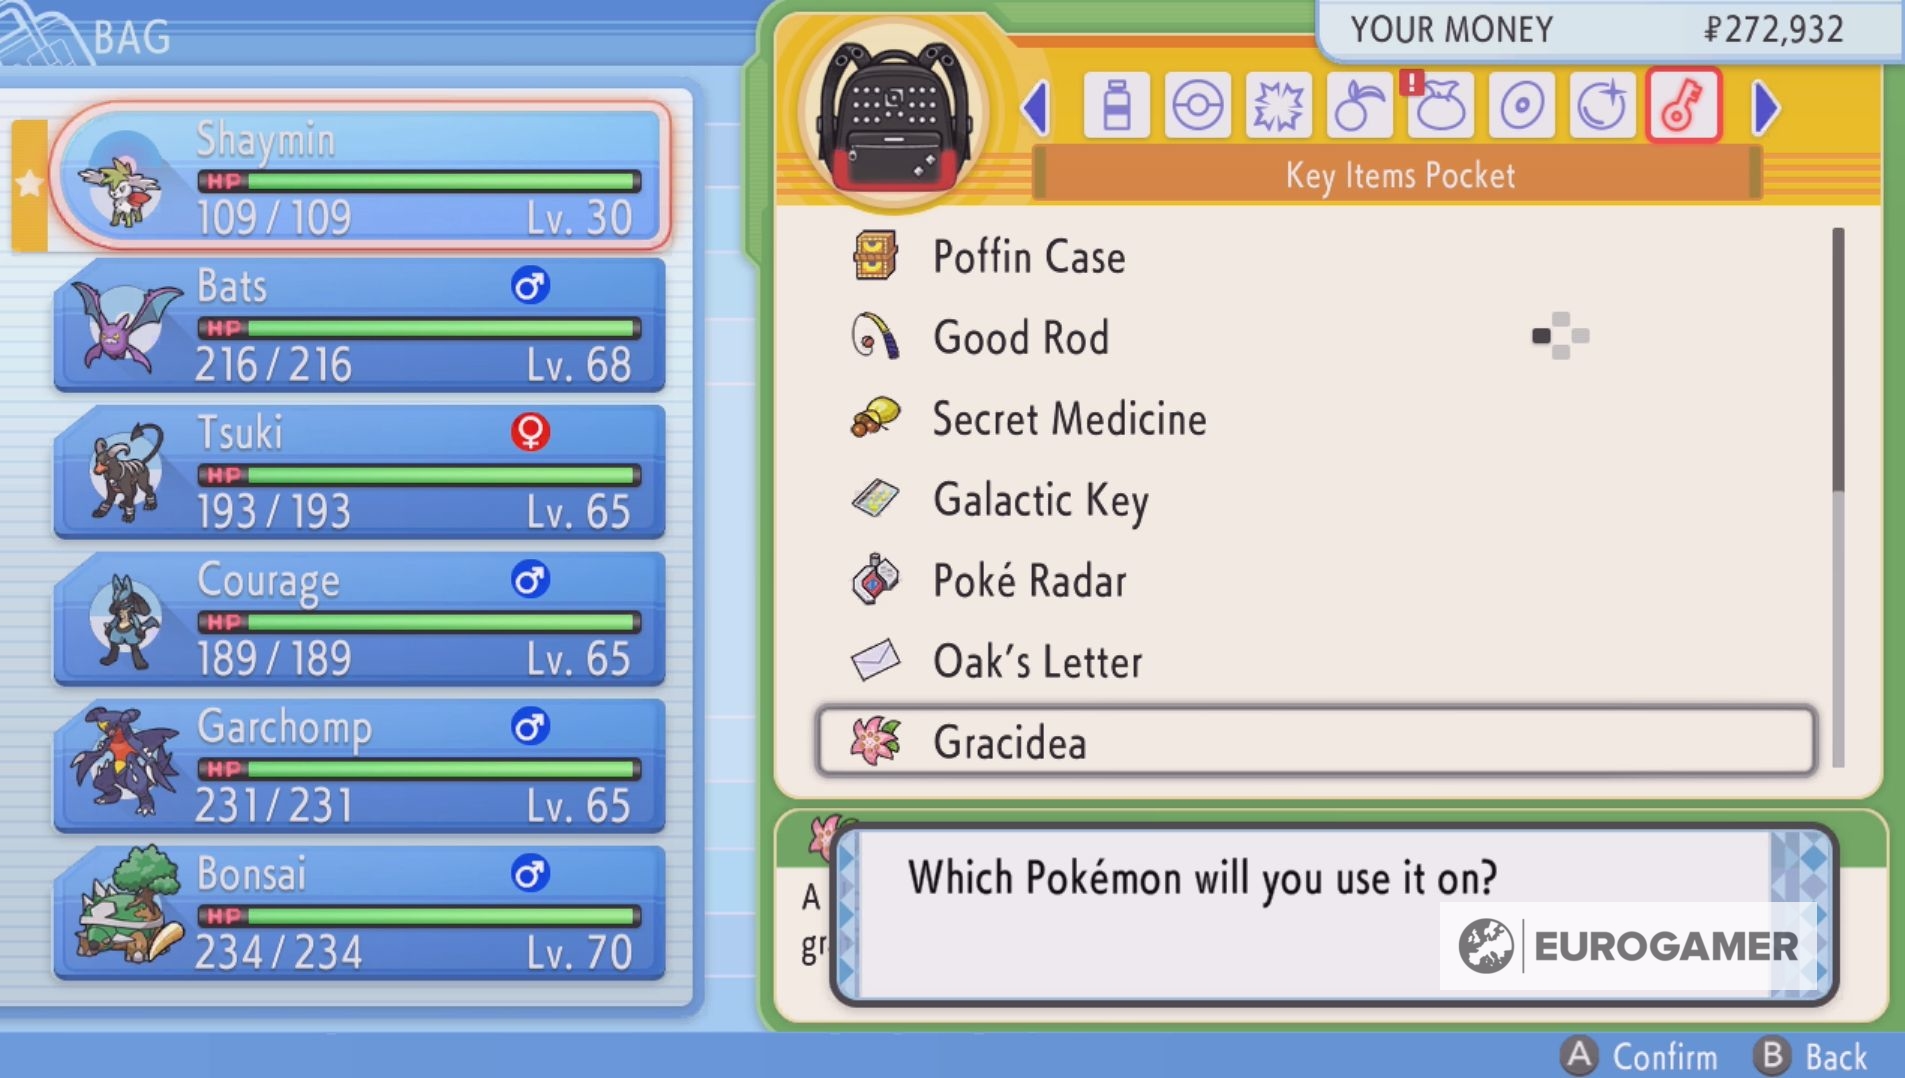 How to get Shaymin and Oaks Letter in Pokémon Brilliant Diamond and Shining Pearl